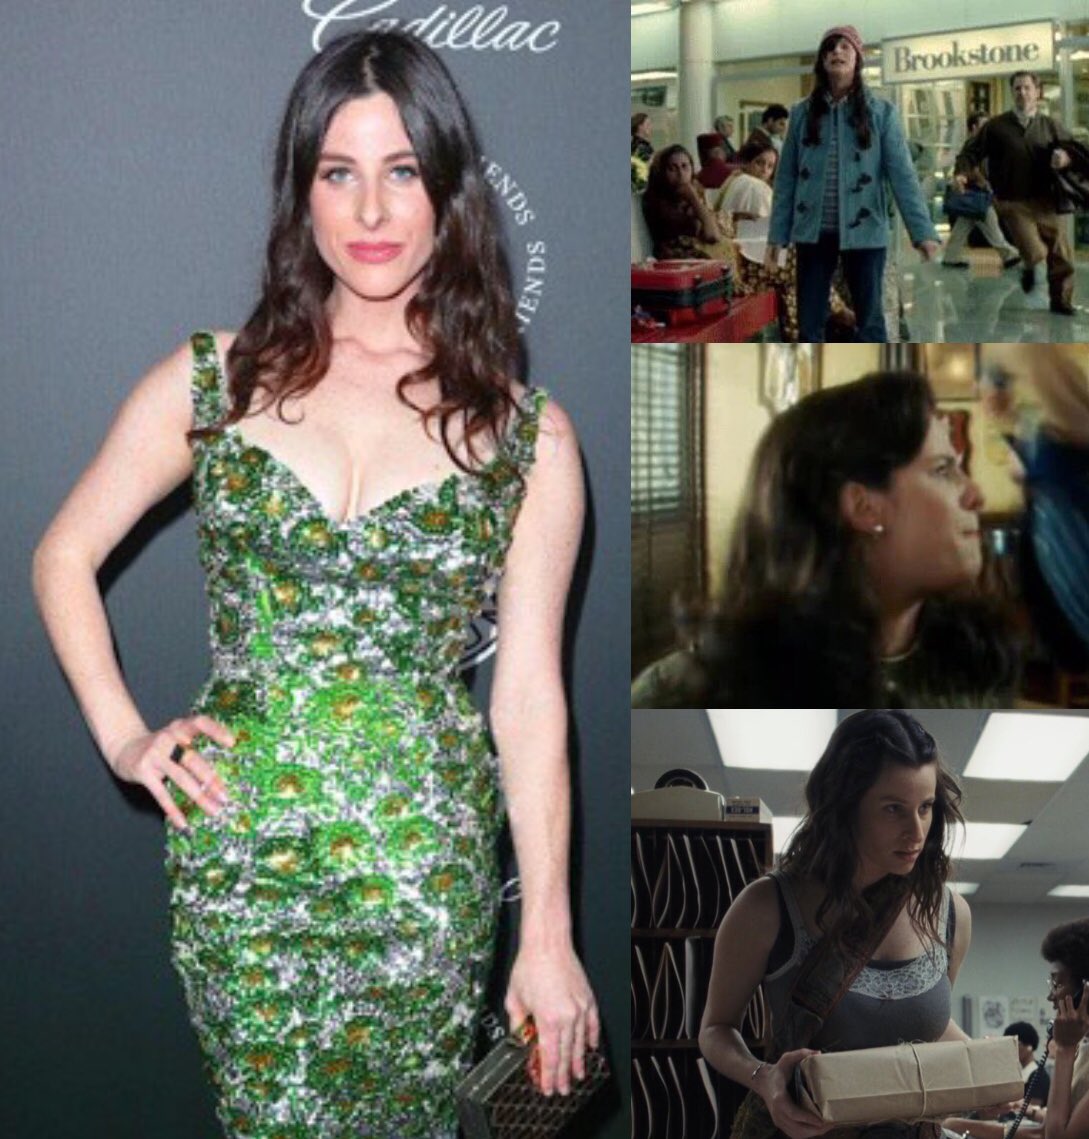 Happy 32nd Birthday to Steven Spielberg’s daughter, Sasha Spielberg (Buzzy Lee)! The actress and musician who played Lucy in The Terminal, Slugger in Indiana Jones and the Kingdom of the Crystal Skull, and the Woman with the Package in The Post. #SashaSpielberg #BuzzyLee